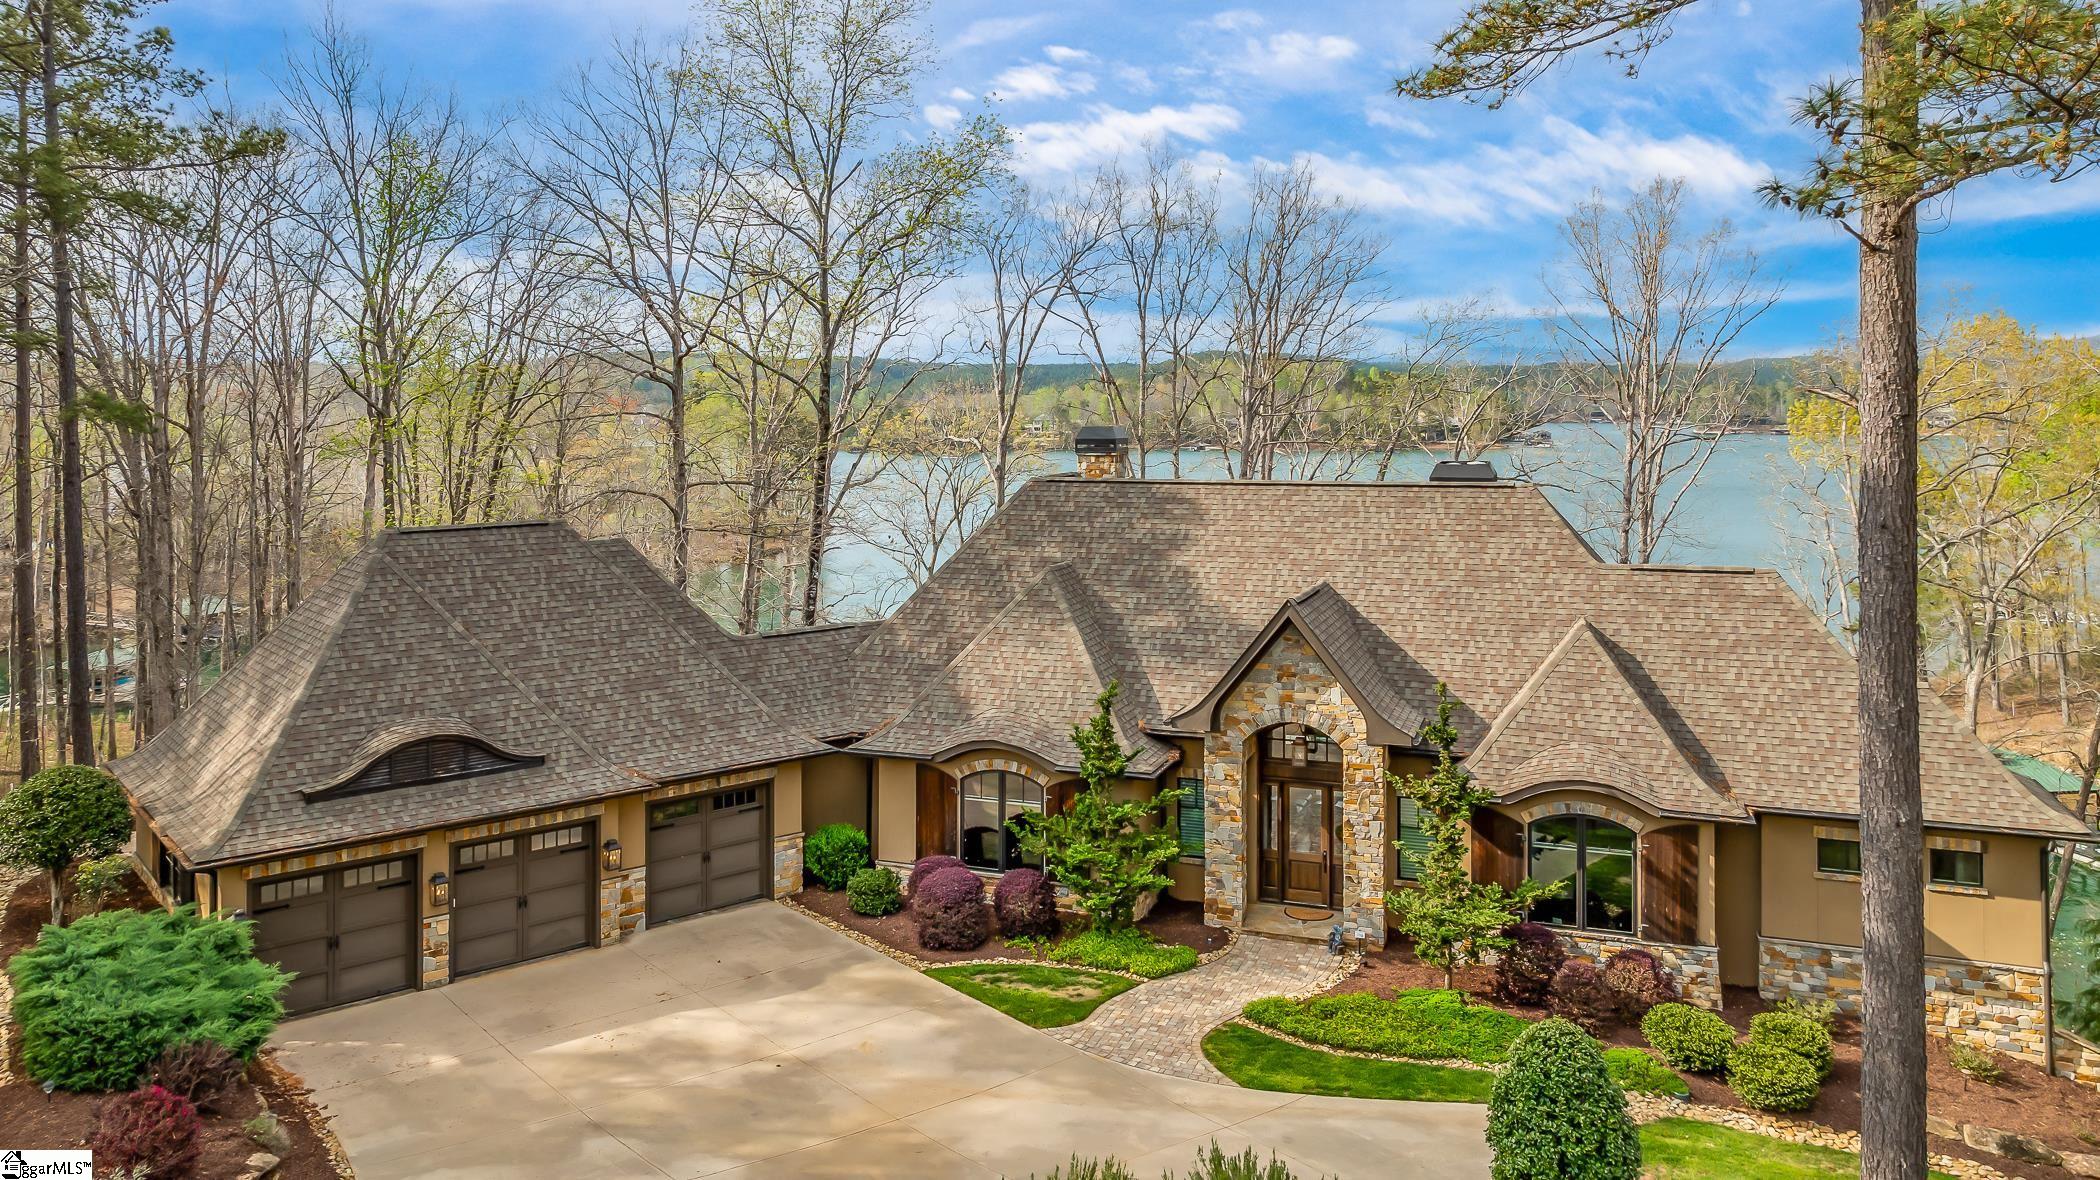 The wait for your dream lake home is finally over! 104 Mountain Shore Trail will be sure to check all your boxes. This 4,192+/- sq ft, four bedroom, three and a half bath craftsman style home is situated perfectly on one of the best waterfront properties on Lake Keowee. With over 180 ft of shoreline and located in an area shielded by boat wakes, you’ll be able to swim, float, kayak, or paddleboard all season long! Whether you prefer to cozy up by the waterfront fire pit or watch the game from your indoor/outdoor bar, this custom home offers areas for relaxing or entertaining inside and out.  This well-designed home built by Dillard Jones in 2017 maximizes the spectacular lake and long-range mountain views. As you enter the foyer, you’re immediately drawn to the view through the vaulted ceiling, arched transom window, and stacking sliding doors in the Great Room. A gas fireplace is smartly situated in the corner with stone from floor to ceiling. The built-in cabinetry creates additional storage space and home for your TV.   The bright and open kitchen is well-appointed with a Wolf four-burner cooktop, pot filler, Sub-Zero french-door refrigerator, Bosch microwave and double-ovens. The combination of the granite countertops, stone backsplash, and nickel-gap detailing creates the ideal environment for the chef in your family.   Off the kitchen, you’ll find a cozy casual dining area with sprawling views and access to the covered, screened porch. The porch can be used during any season due to the gas fireplace. Another spacious porch is located off the Great Room with a built-in gas grill. This uncovered area allows for natural light to flow inside and for you to enjoy the sunshine year-round.  If you desire more room for hosting then walk through the wine bar situated with a beverage cooler, cabinetry, additional counter space and into the formal dining area. You’ll be able to accommodate all your friends and family.  Located off the 3-car garage is a large utility room and arrival center. You’ll never yearn for more storage with the ample cabinetry and coat closet. This area boasts a utility sink, desk, bench with hooks, room for a washer and dryer, and a powder bath right around the corner.   On the opposite side of the main-level, there is a spacious office with hardwood floors overlooking the beautifully landscaped front yard.  Across the hall, the Owner’s Suite is the ideal sanctuary. Enjoy the view of Lake Keowee and Blue Ridge Mountains from a comfortable seating area near the bay windows or sip your morning coffee from the porch off the suite.   You’ll pass his & her closets as you walk to the Owner’s Bathroom from the bedroom. Here you’ll find two vanities with an area designed for applying makeup along with a soaking tub and walk-in shower.   Descend the staircase or utilize the elevator to access the lower-level walkout. The lower-level features a recreation room with a gas fireplace, billiards room, an indoor/outdoor wet bar, wine storage, three more bedrooms, two full bathrooms, and an exercise room. The wet bar includes a sink, dishwasher, beverage cooler, and mini refrigerator so you can entertain with ease. A climate controlled wine cellar has plenty of room to store your favorite bottles. The tiled floors allow you to come in from the lake worry-free while the carpeted bedrooms create a cozy environment.  The path from the lower-level porch leads you to the dock. For your convenience, you can walk to ride your golf cart or GEM car to the dock or any of the close amenities.   A Cliffs membership is available for separate purchase, allowing you to indulge in the recreational offerings available at all seven clubs located throughout South and North Carolina. From award-winning golf courses to formal dining restaurants, wellness centers with tennis and pickleball courts, and more.